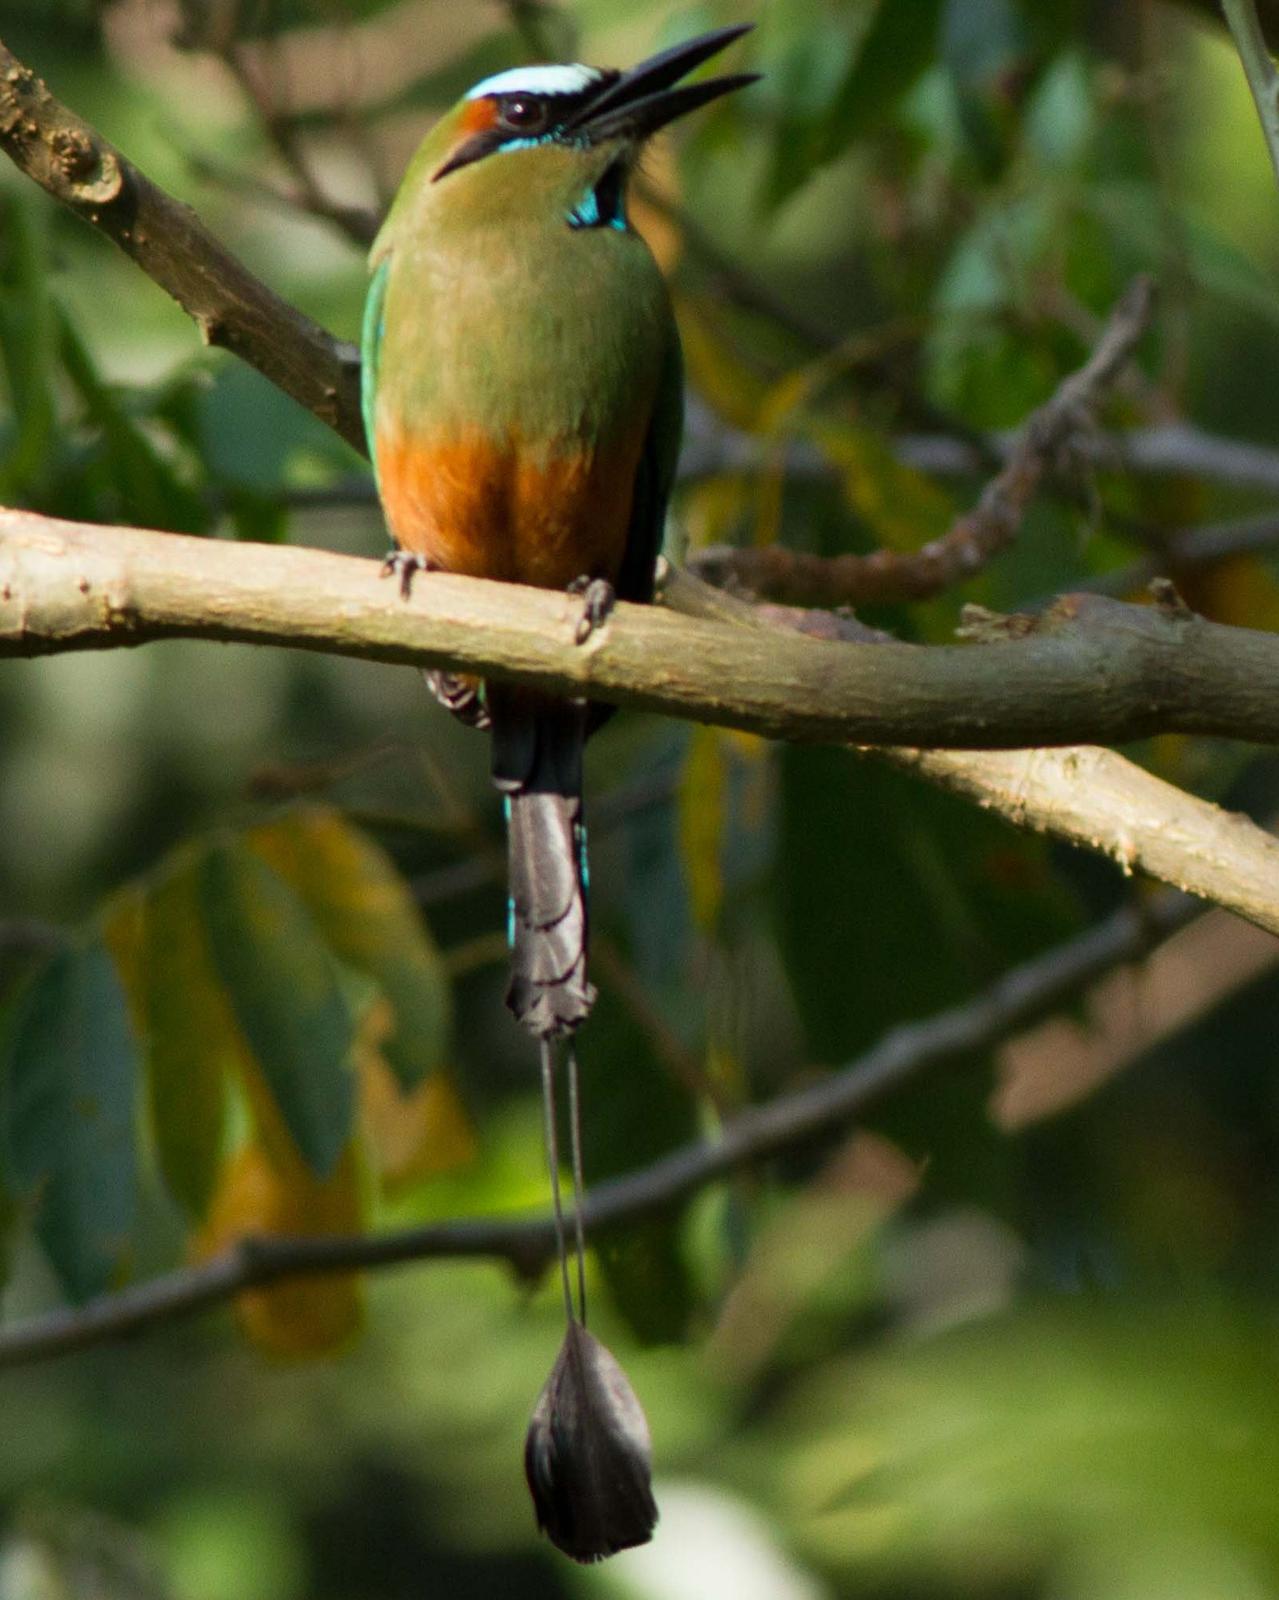 Turquoise-browed Motmot Photo by Jeff Gerbracht